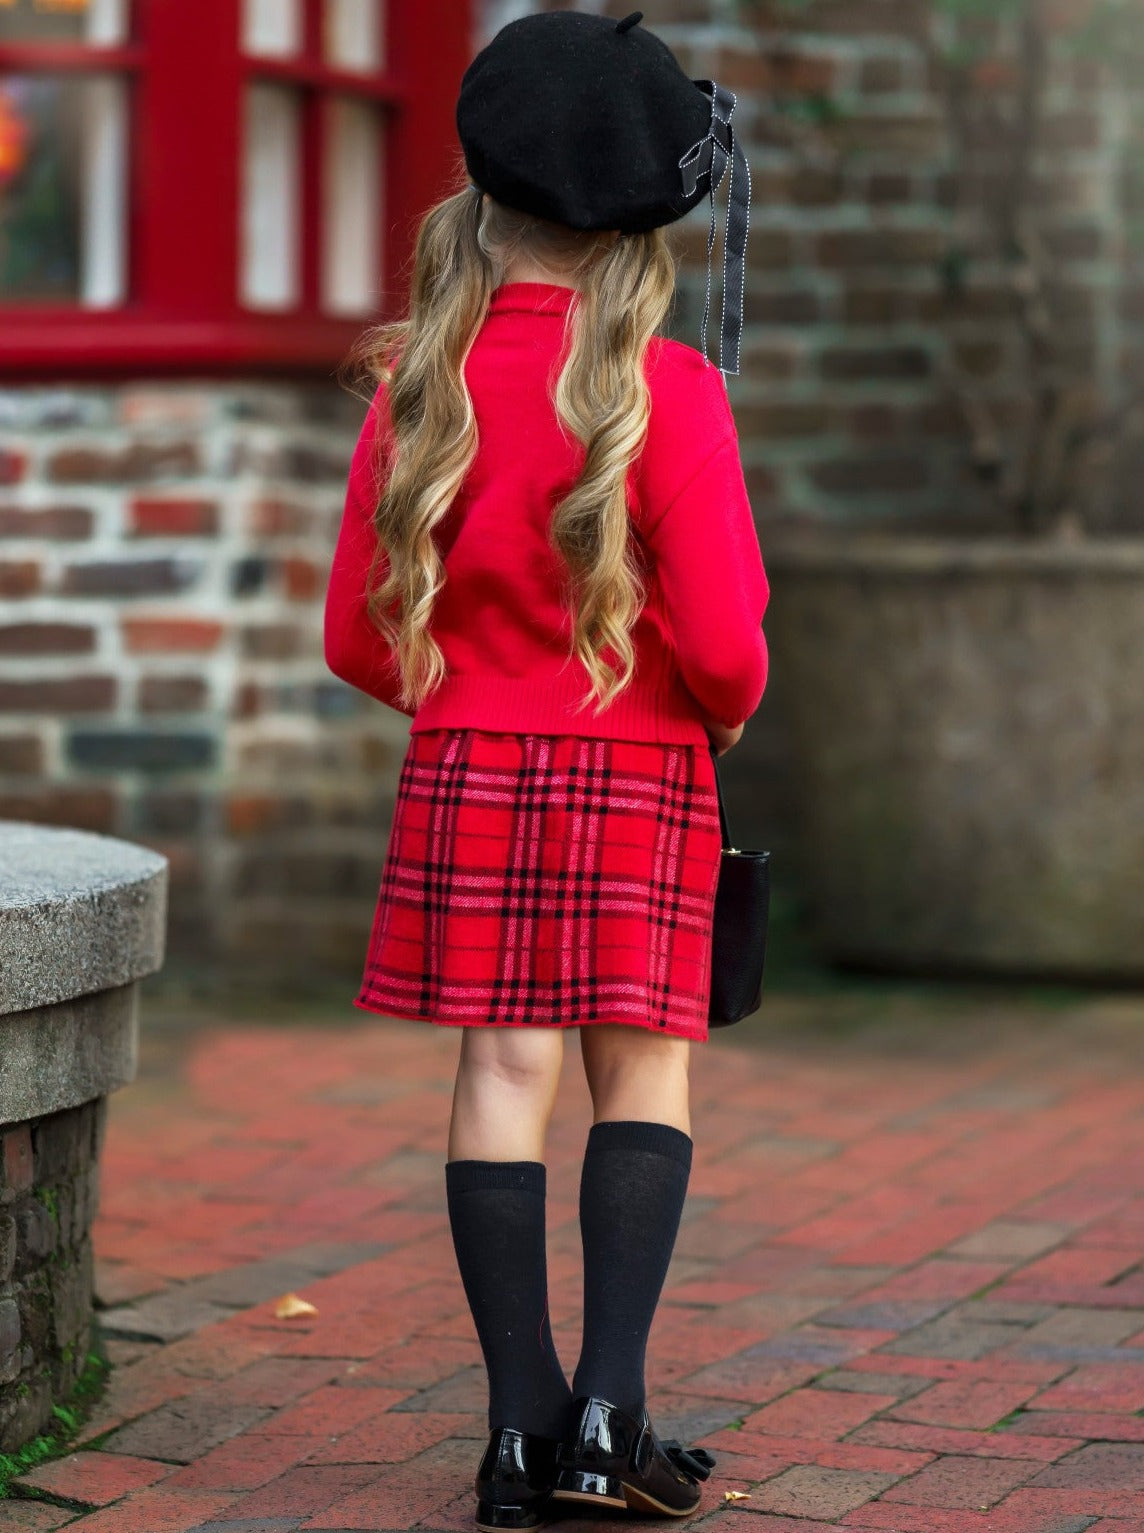 Preppy Chic Clothes | Red Cardigan & Plaid Skirt Set | Mia Belle Girls